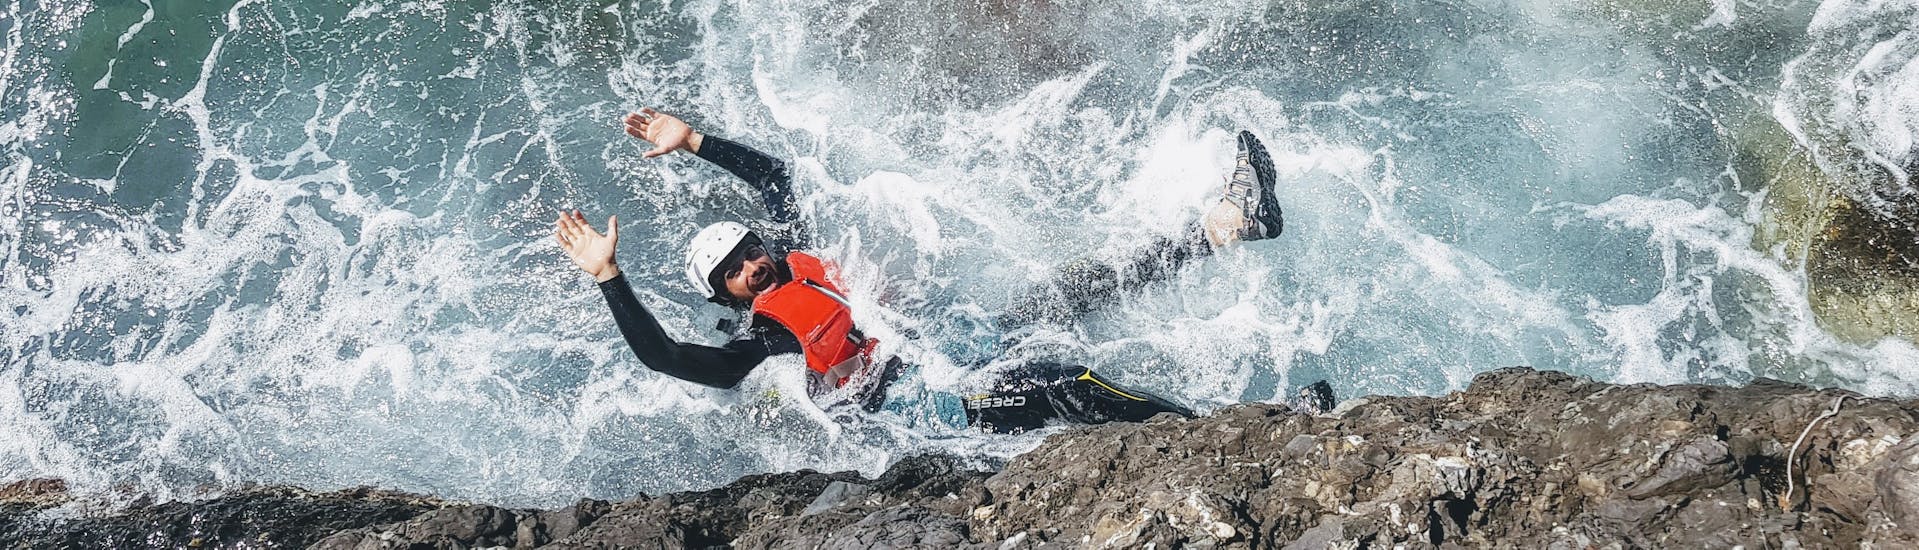 A person is having fun during our Coasteering in Portofino from Niasca to Baia Cannone with Outdoor Portofino.